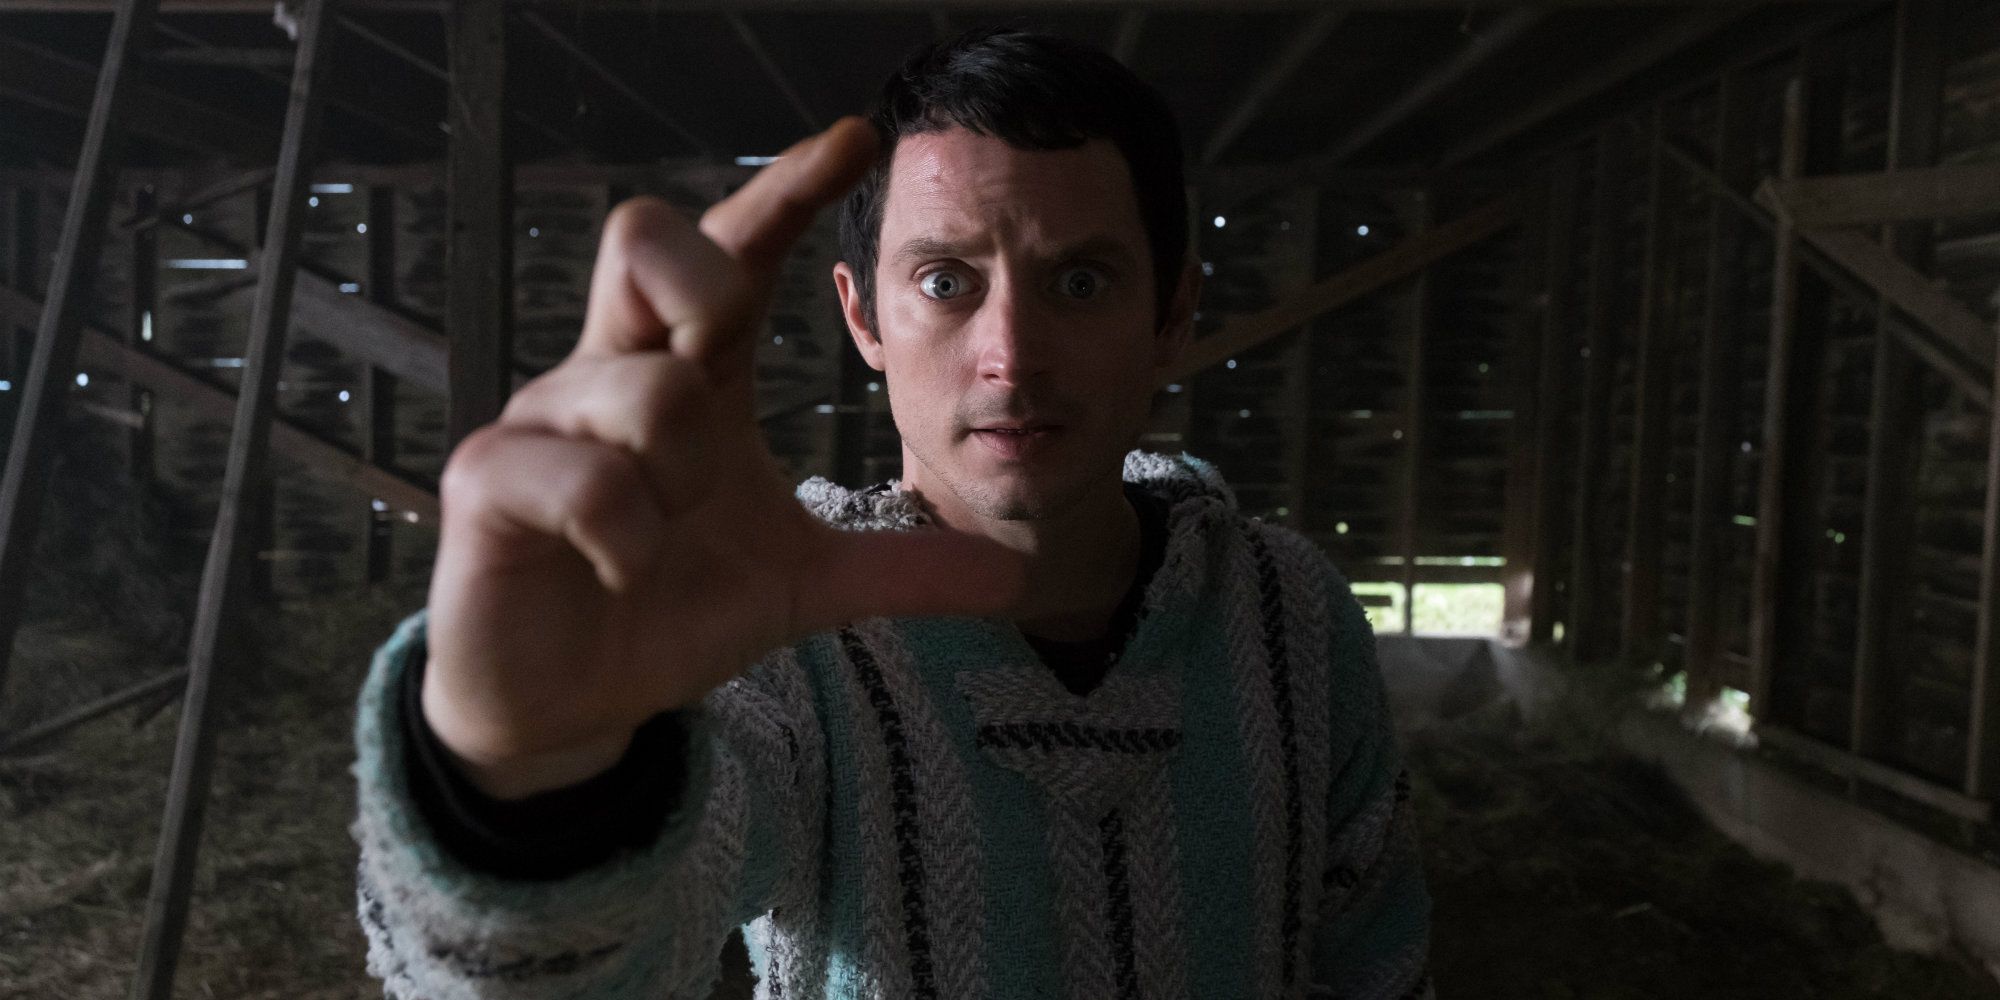 Elijah Wood as Todd Brotzman in Dirk Gently's Holistic Detective Agency holding hand in front of face